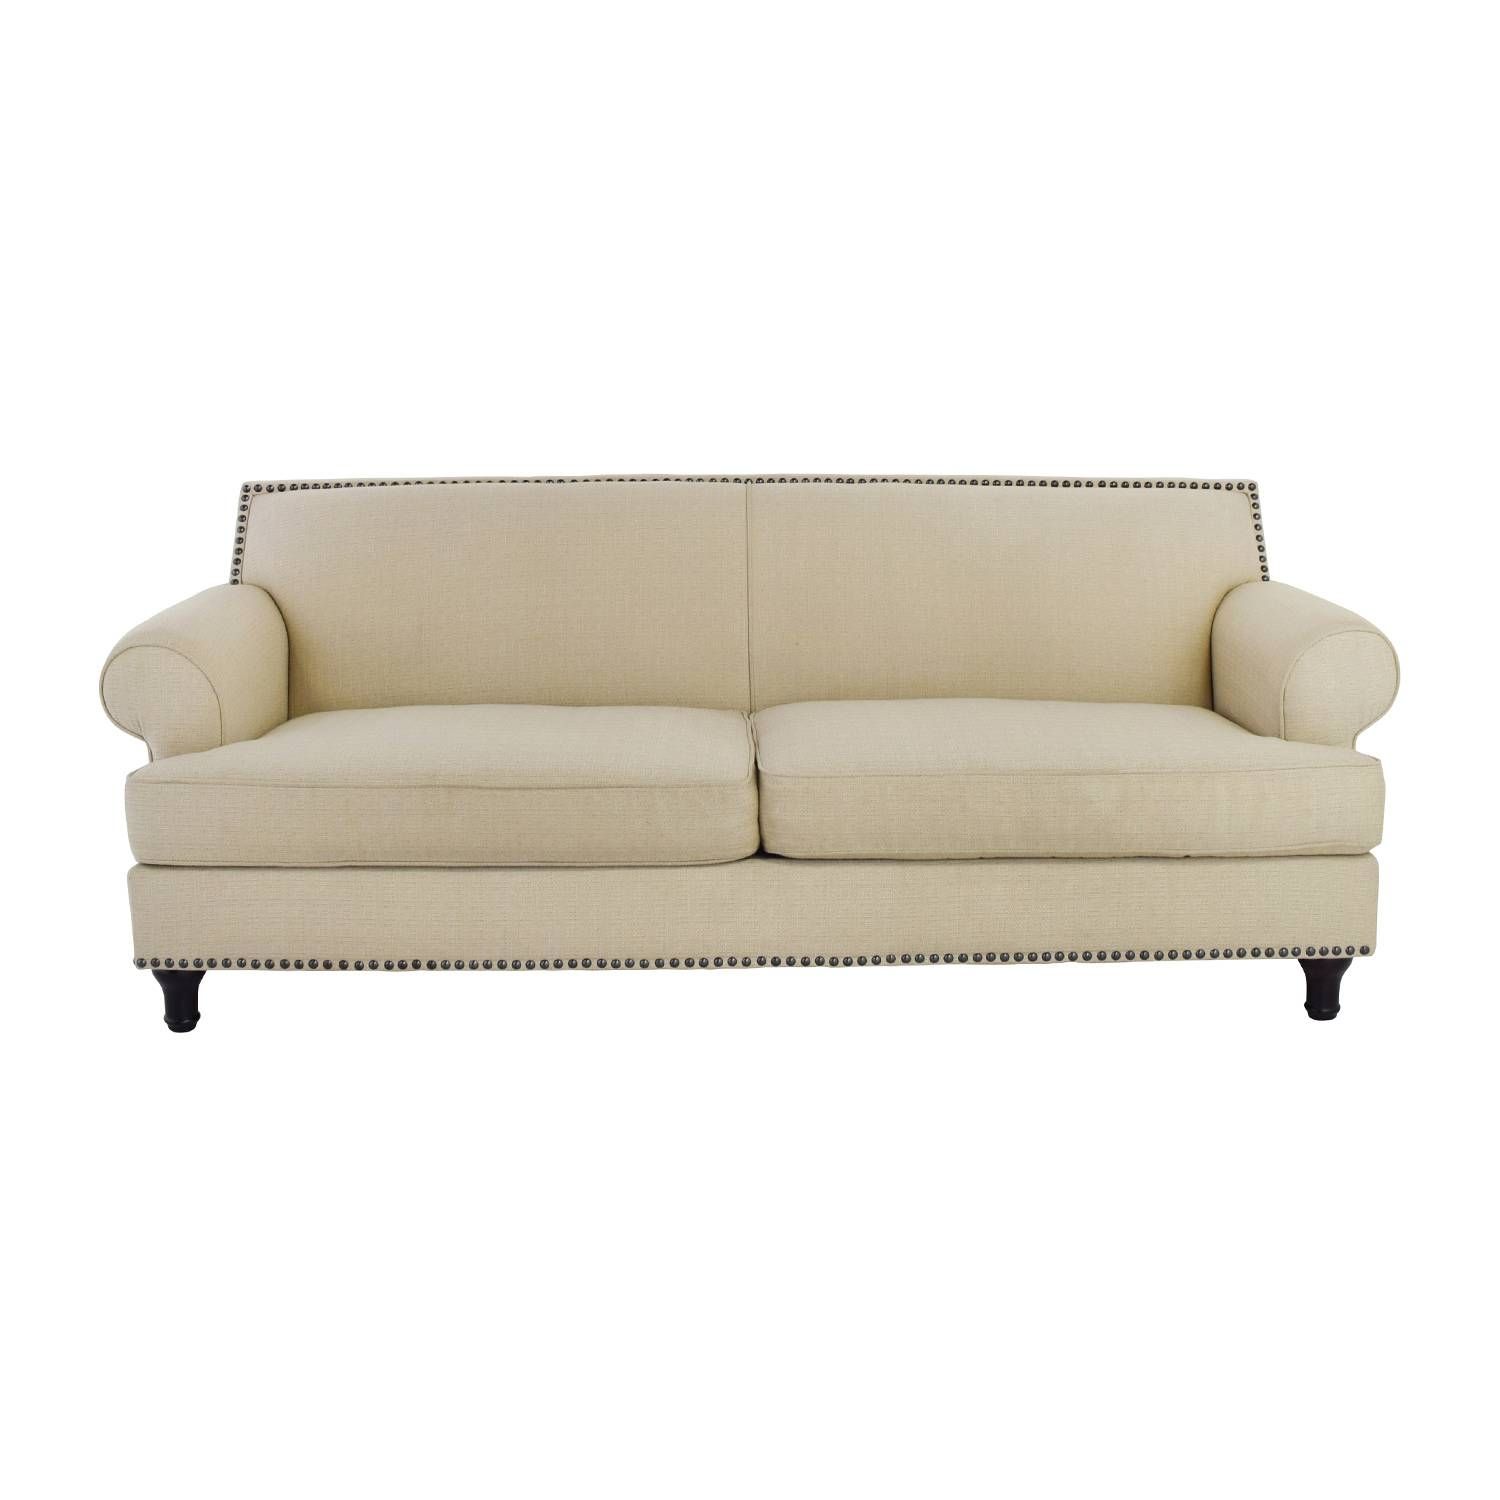 48% Off – Pier 1 Pier 1 Carmen Tan Couch With Studs / Sofas Within Pier 1 Carmen Sofas (View 6 of 15)